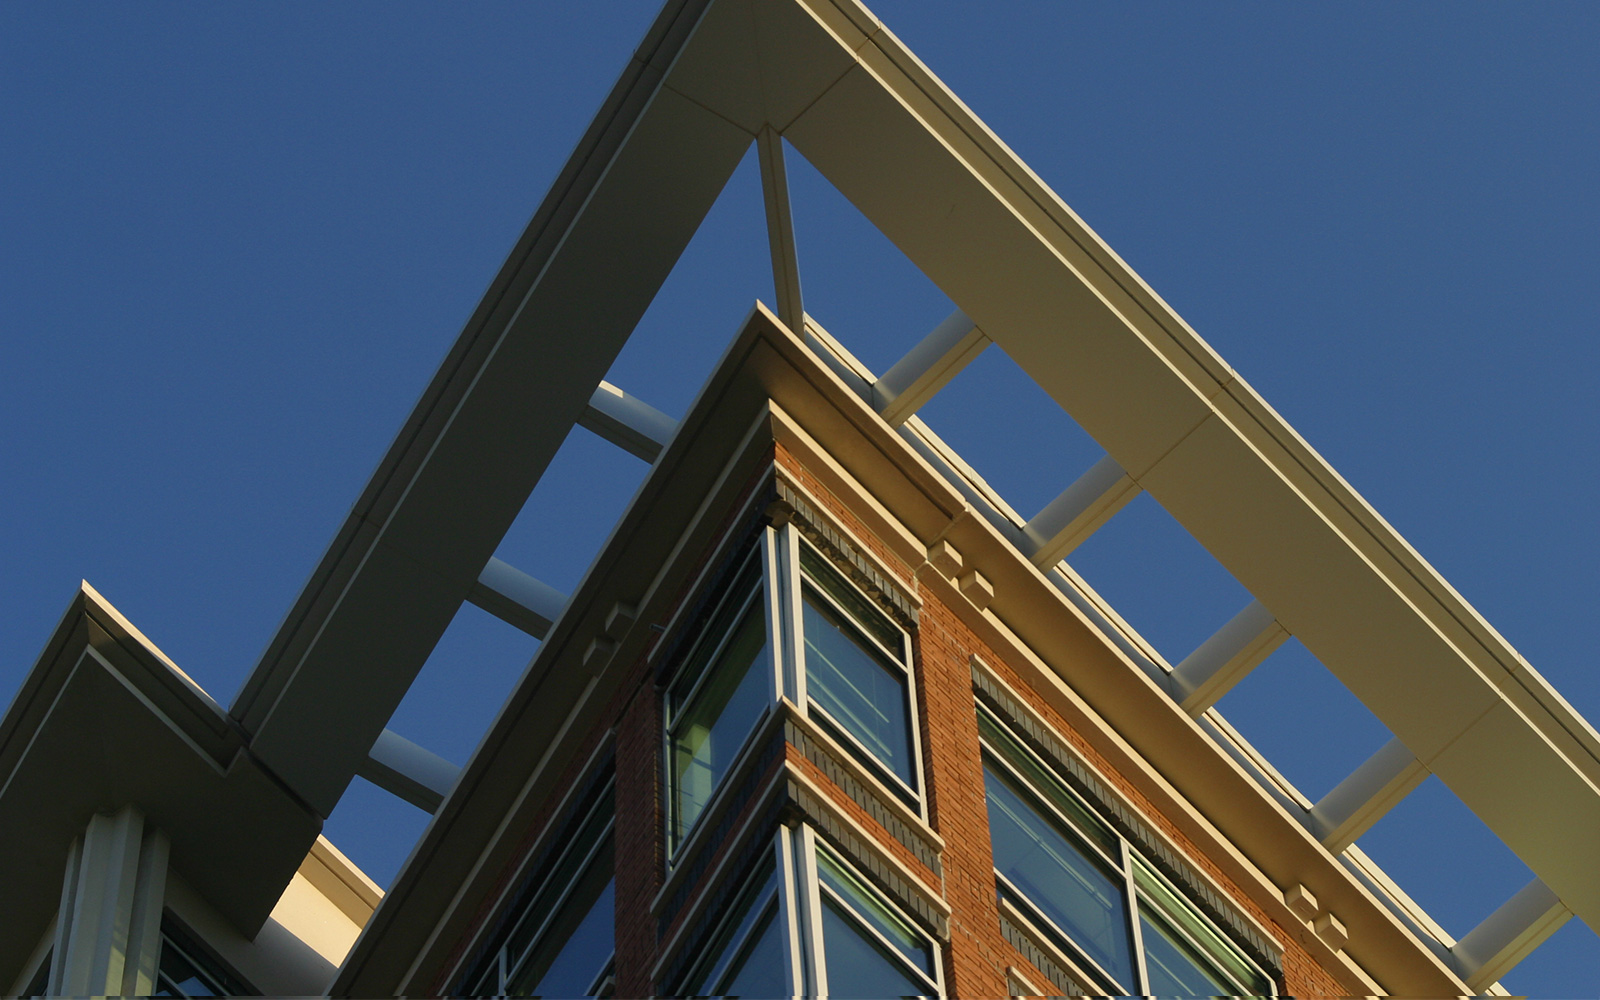 The top corner of a modern building, as seen from below, with blue sky in the background